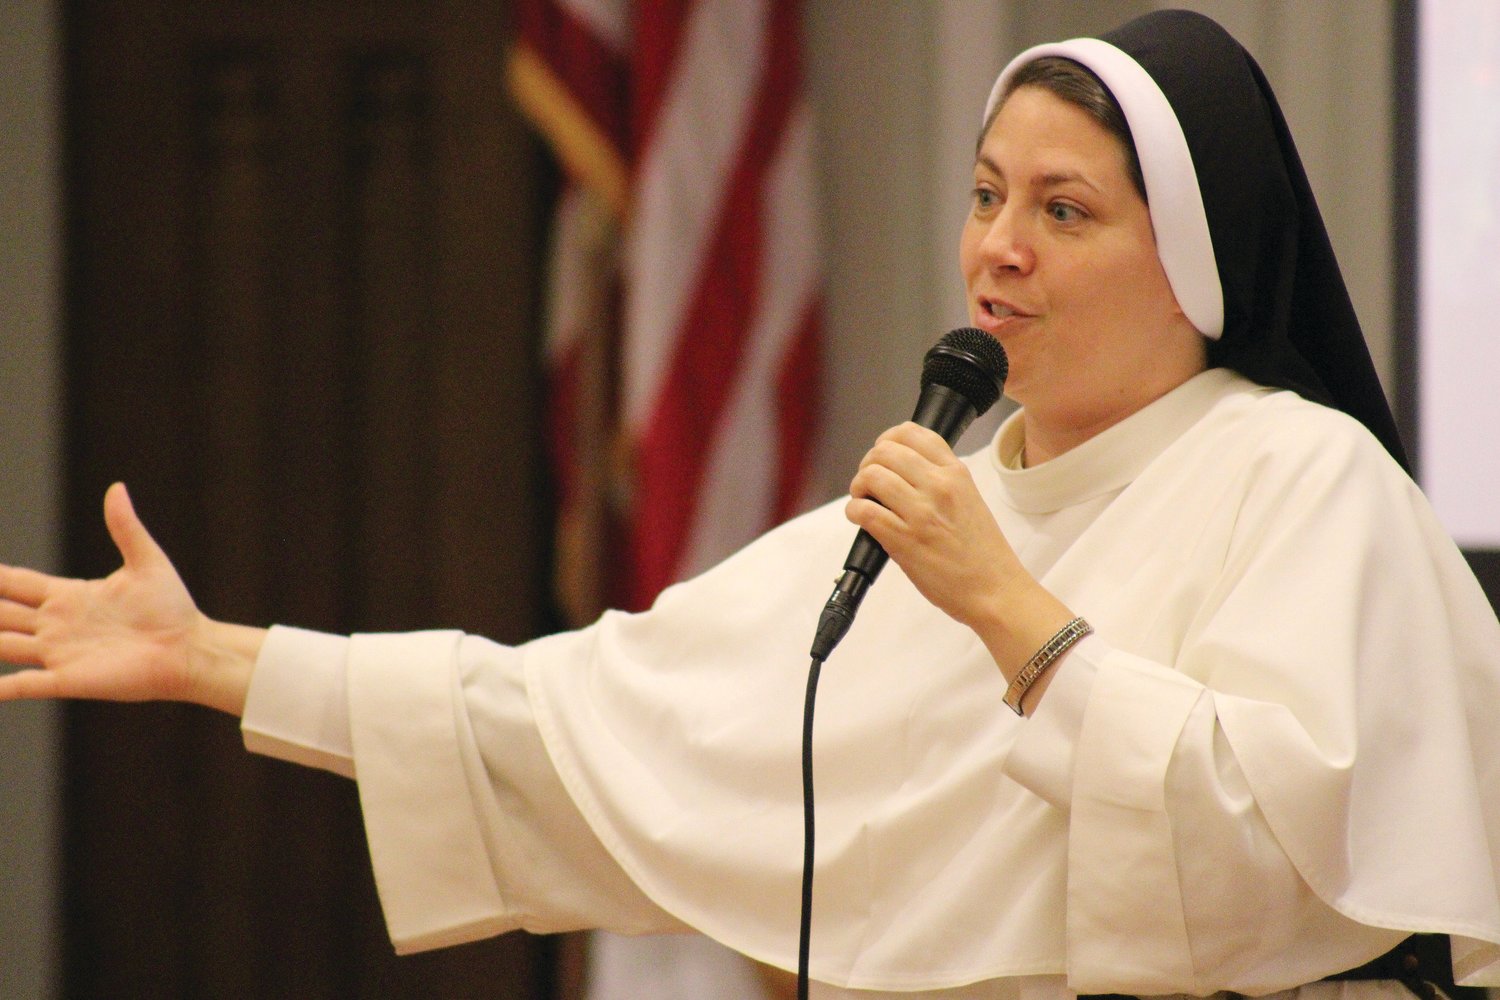 The Office of Faith Formation’s 2022 Women’s Conference featured presentations by Pat Gohn, a national Catholic speaker, author, podcaster, and editor of “Living Faith Daily Catholic Devotions;” as well as Sister Josemaría Pence, O.P., pictured, Dominican Sister of St. Cecilia of Nashville, Tennessee, and principal of St. Pius V School, Providence.